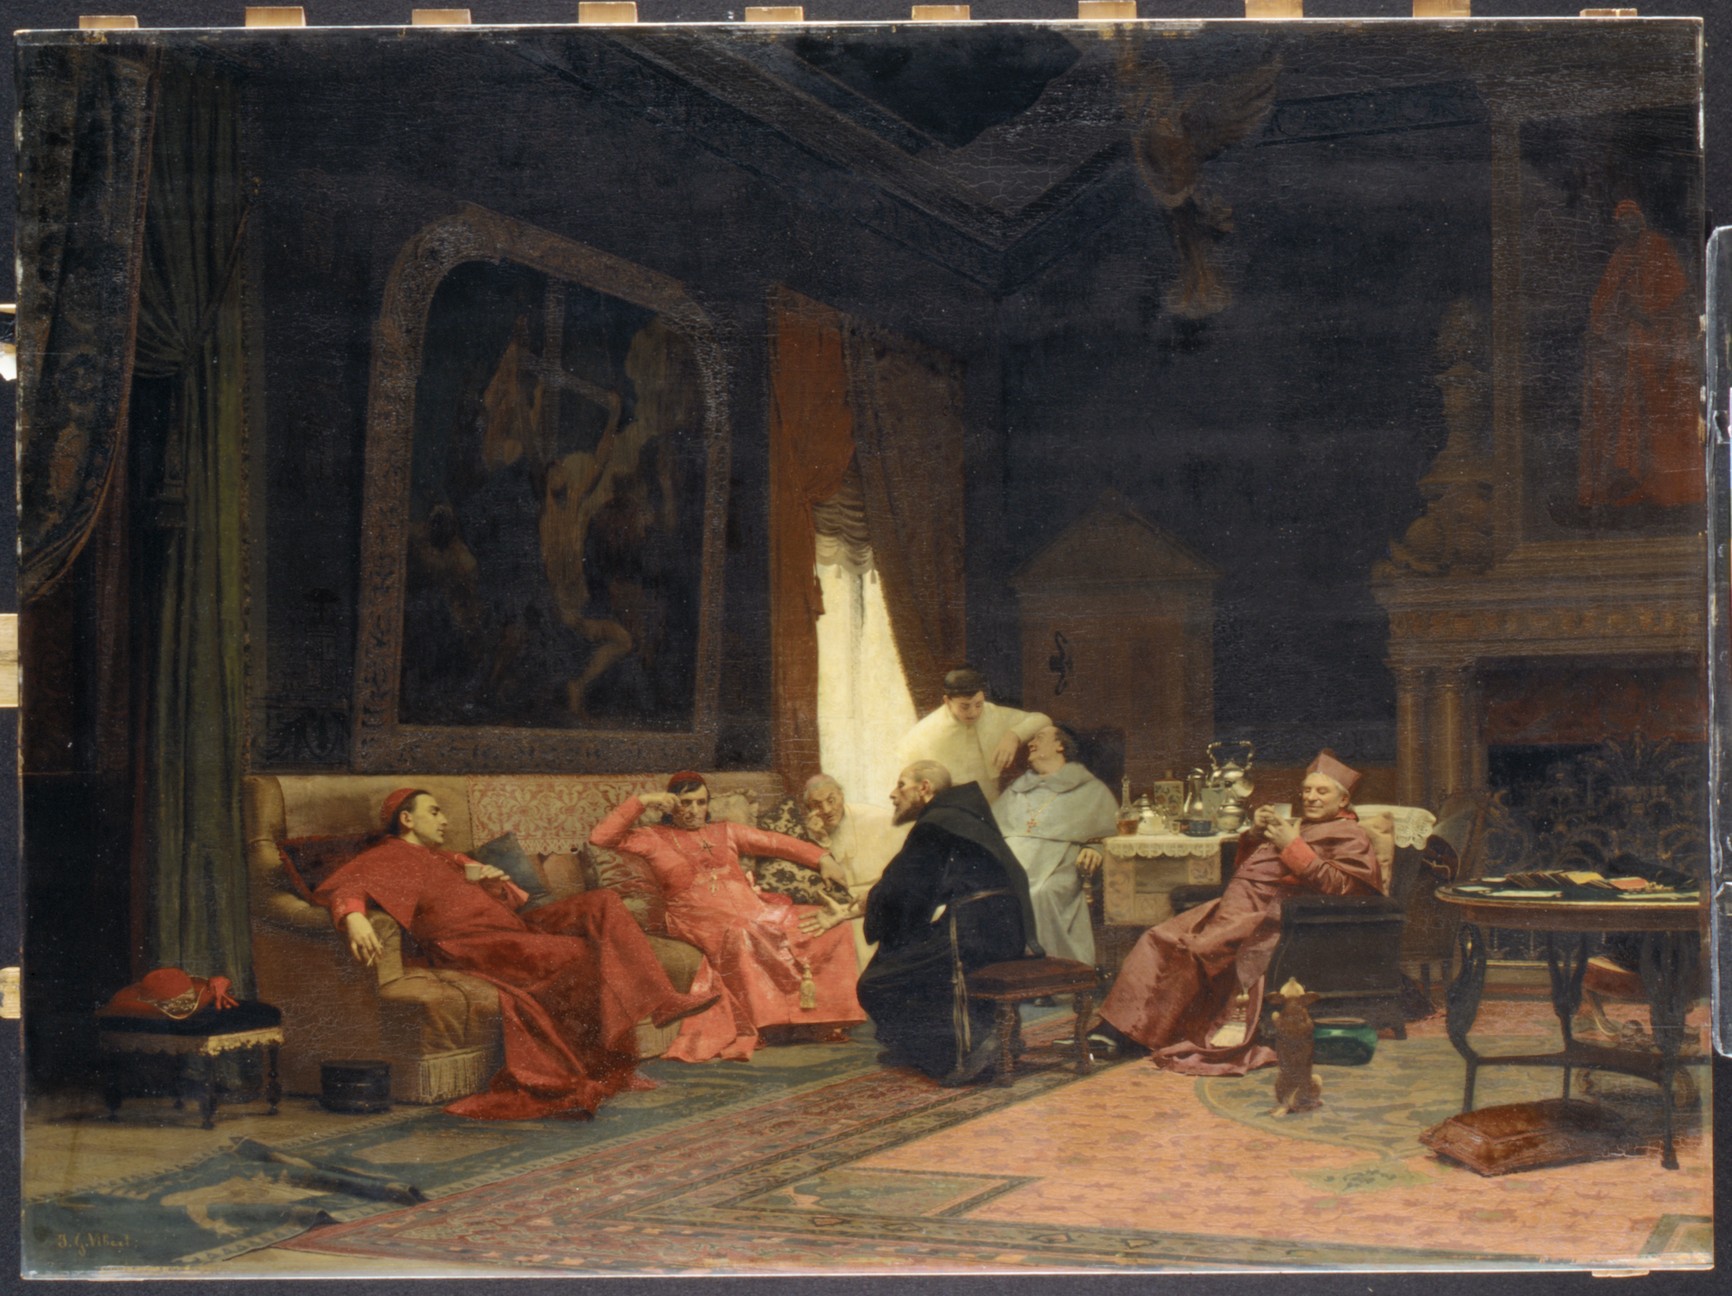 The Missionary's Adventures by Jehan Georges Vibert - 1883 - - Metropolitan Museum of Art